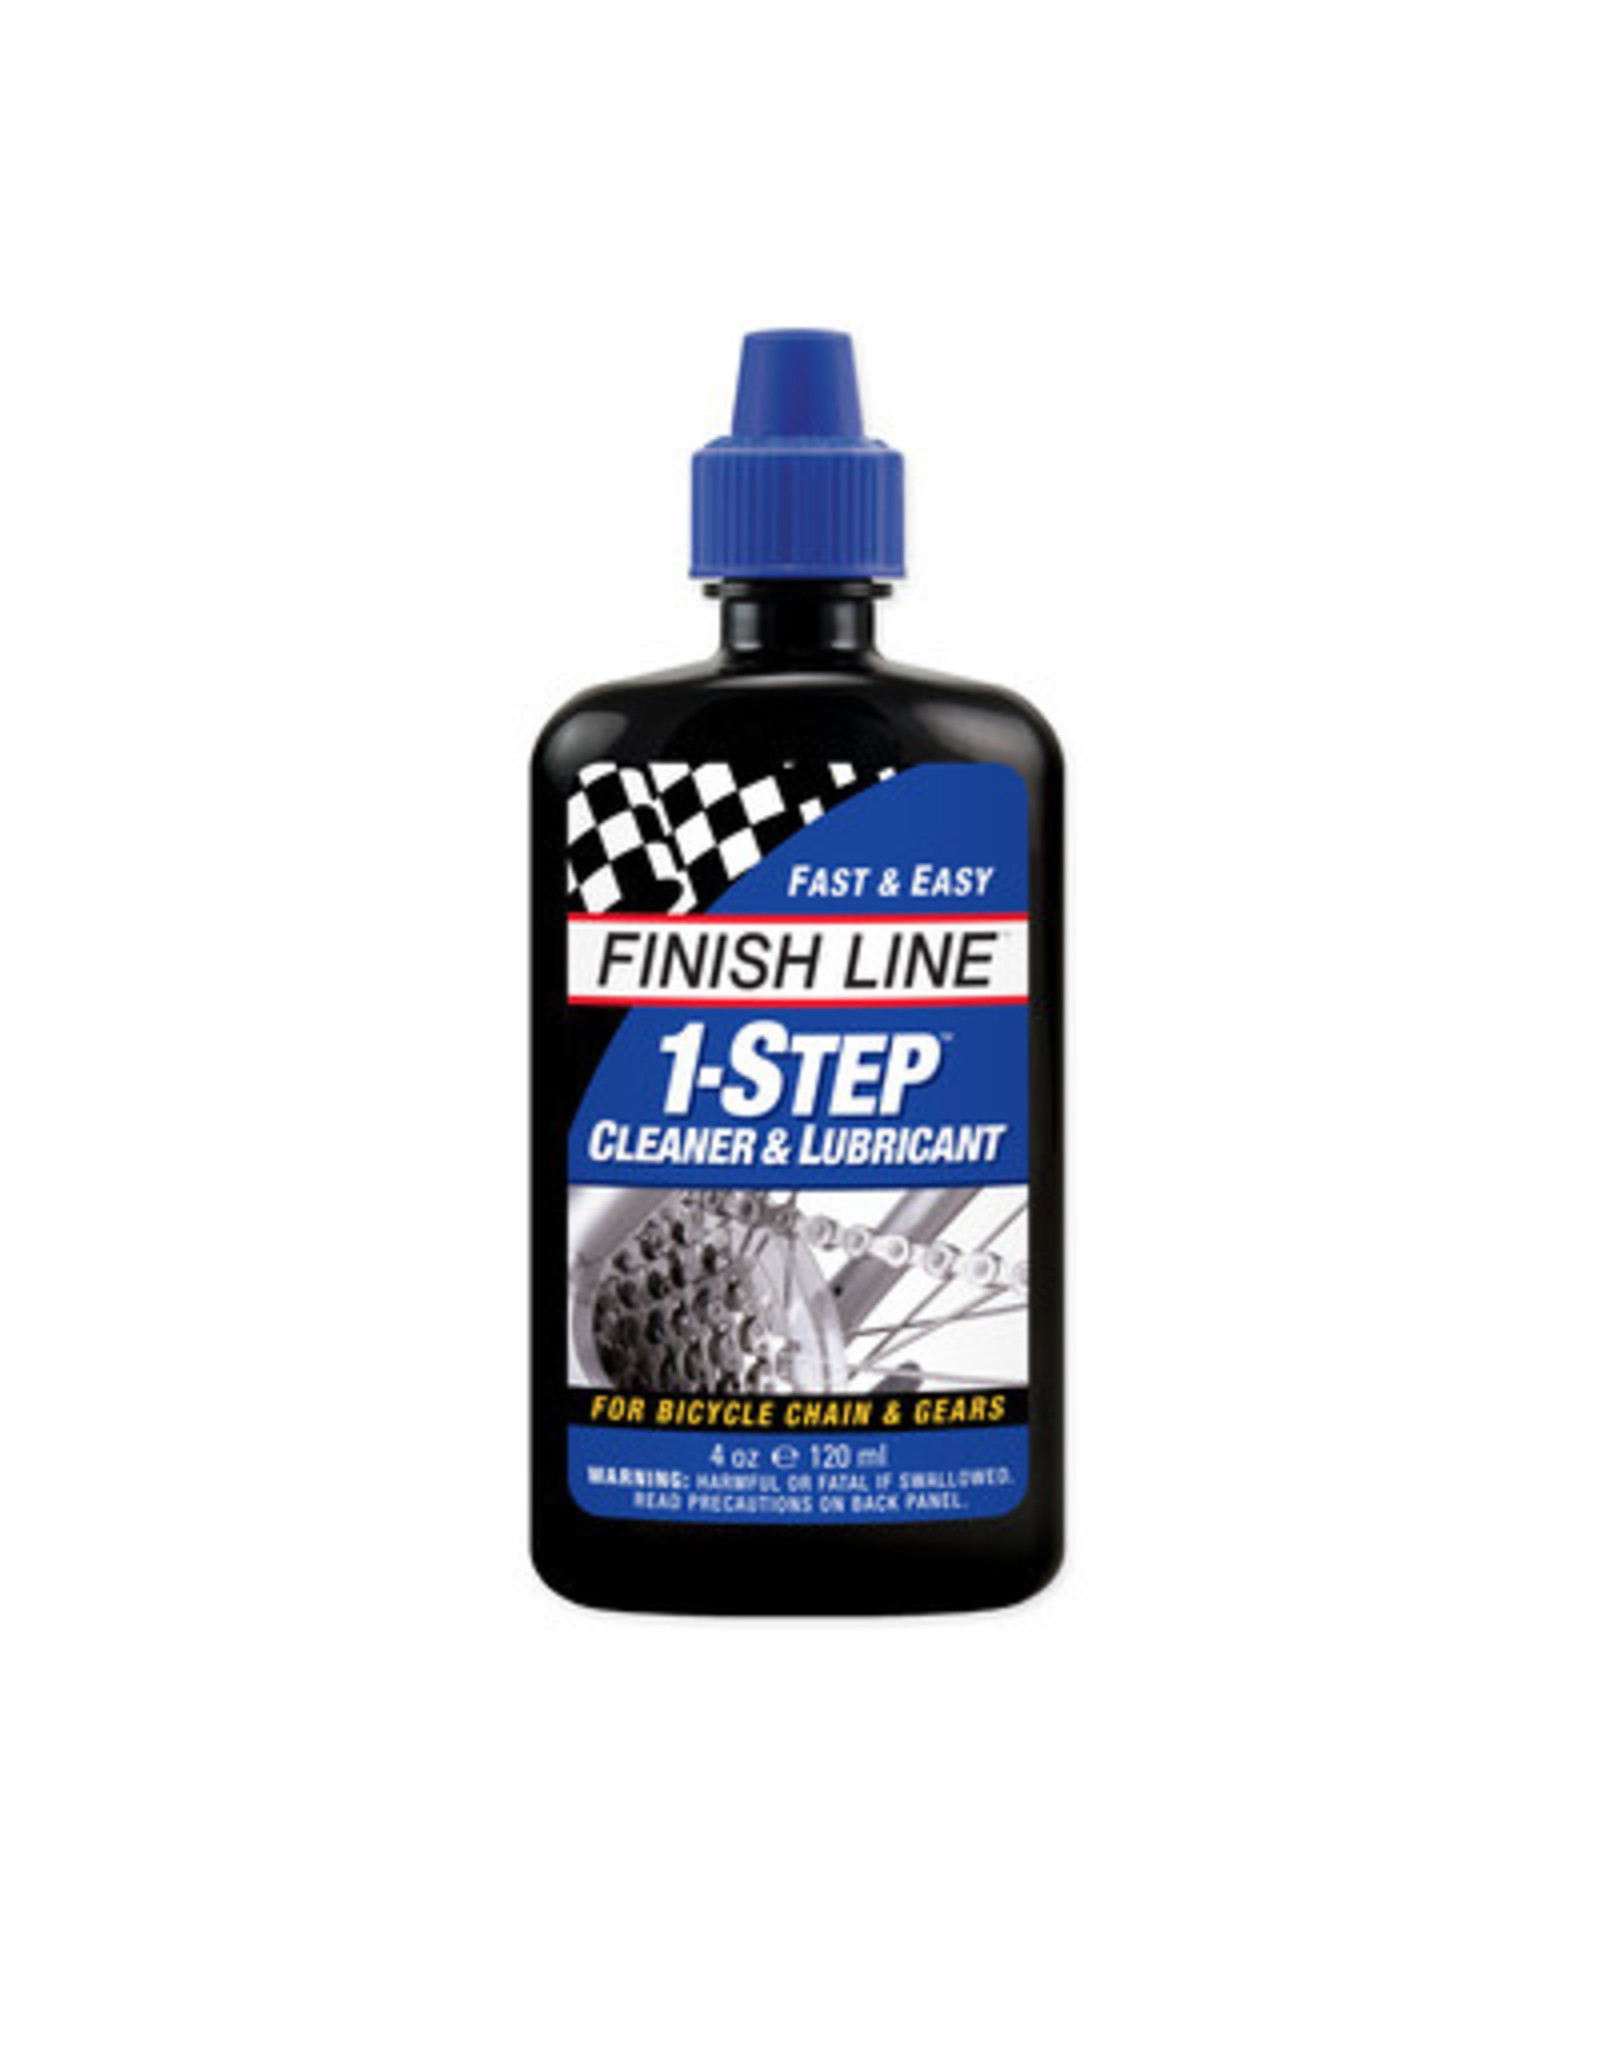 FINISH LINE Finish Line 1-Step Cleaner & Lubricant